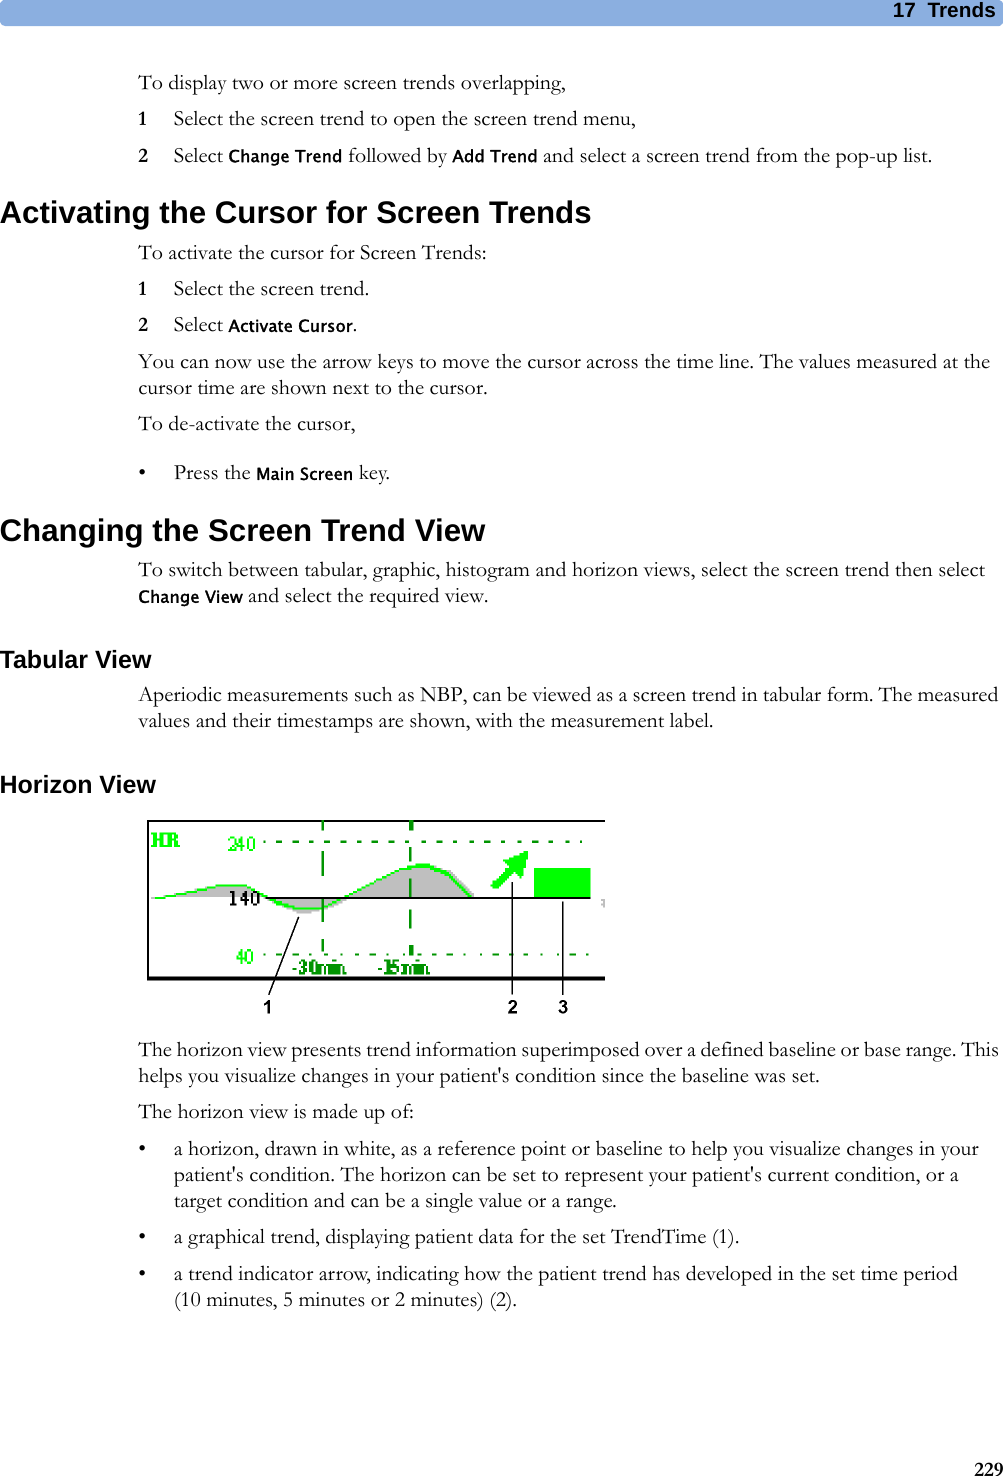 17 Trends229To display two or more screen trends overlapping,1Select the screen trend to open the screen trend menu,2Select Change Trend followed by Add Trend and select a screen trend from the pop-up list.Activating the Cursor for Screen TrendsTo activate the cursor for Screen Trends:1Select the screen trend.2Select Activate Cursor.You can now use the arrow keys to move the cursor across the time line. The values measured at the cursor time are shown next to the cursor.To de-activate the cursor,• Press the Main Screen key.Changing the Screen Trend ViewTo switch between tabular, graphic, histogram and horizon views, select the screen trend then select Change View and select the required view.Tabular ViewAperiodic measurements such as NBP, can be viewed as a screen trend in tabular form. The measured values and their timestamps are shown, with the measurement label.Horizon ViewThe horizon view presents trend information superimposed over a defined baseline or base range. This helps you visualize changes in your patient&apos;s condition since the baseline was set.The horizon view is made up of:• a horizon, drawn in white, as a reference point or baseline to help you visualize changes in your patient&apos;s condition. The horizon can be set to represent your patient&apos;s current condition, or a target condition and can be a single value or a range.• a graphical trend, displaying patient data for the set TrendTime (1).• a trend indicator arrow, indicating how the patient trend has developed in the set time period (10minutes, 5minutes or 2minutes) (2).